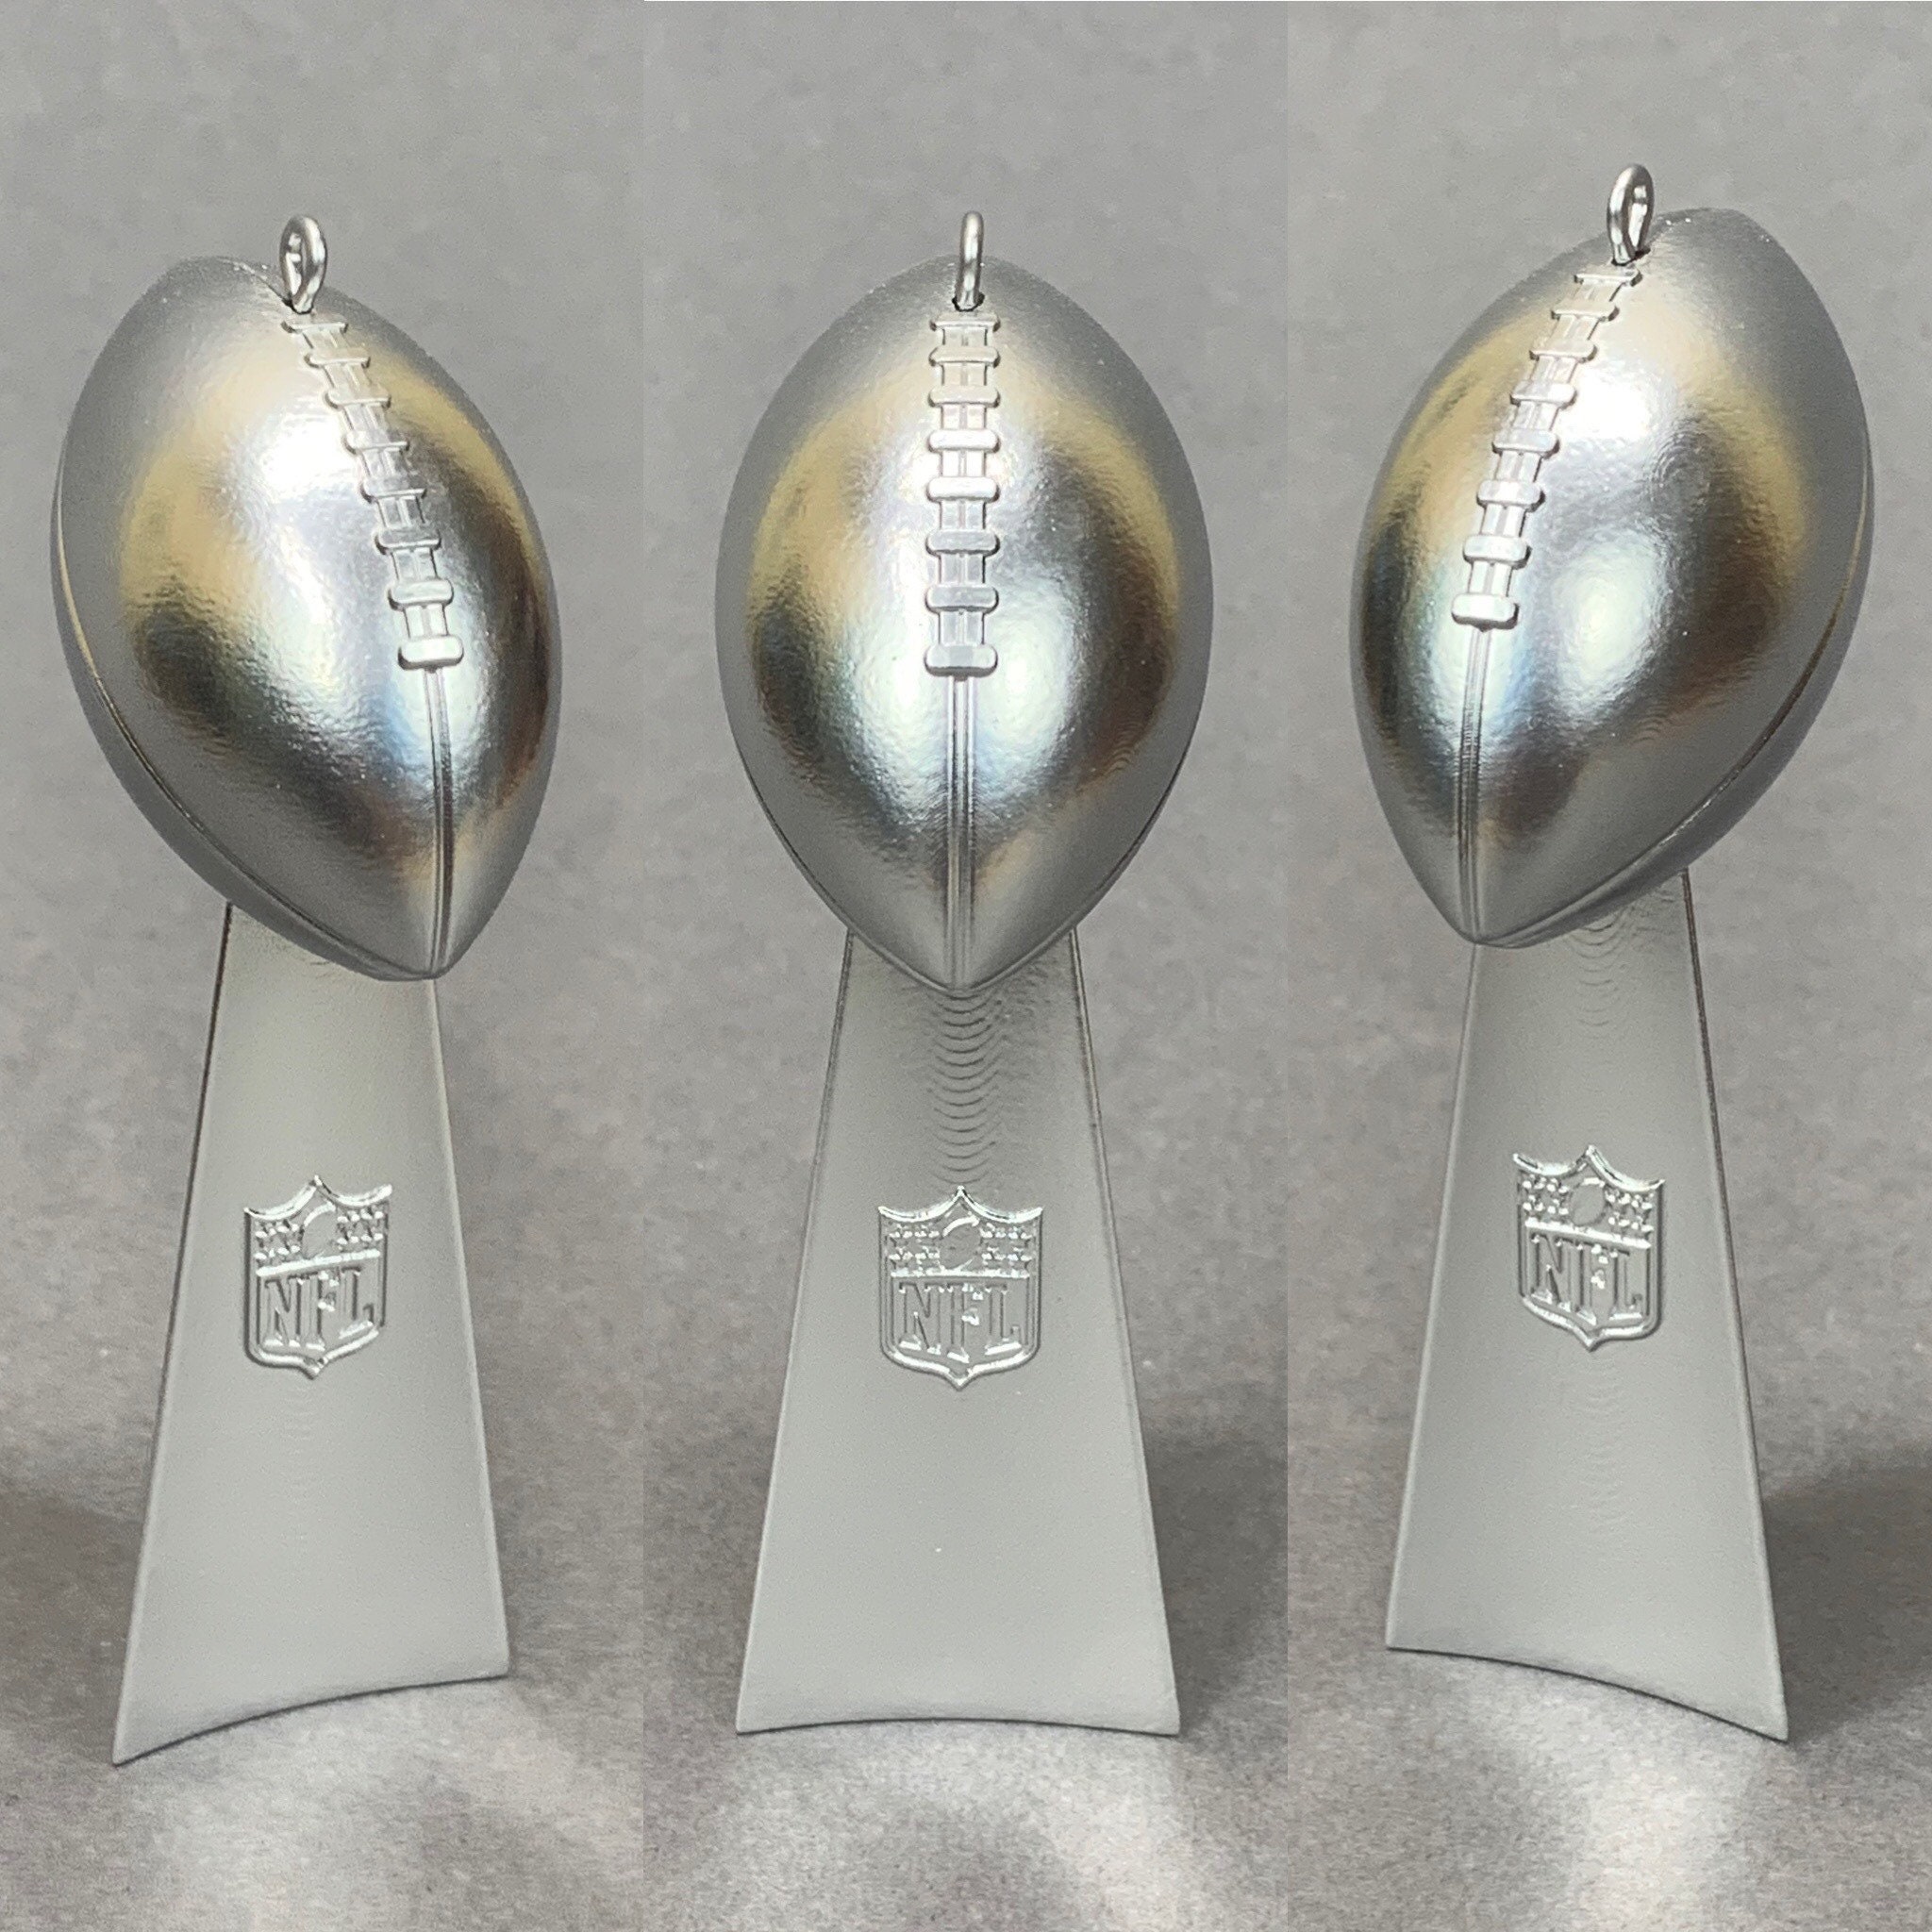 LG&S NFL Super Bowl Ring Set of 55 Collectibles Rubdy Championship Ring  Trophy Replica Football Spor…See more LG&S NFL Super Bowl Ring Set of 55